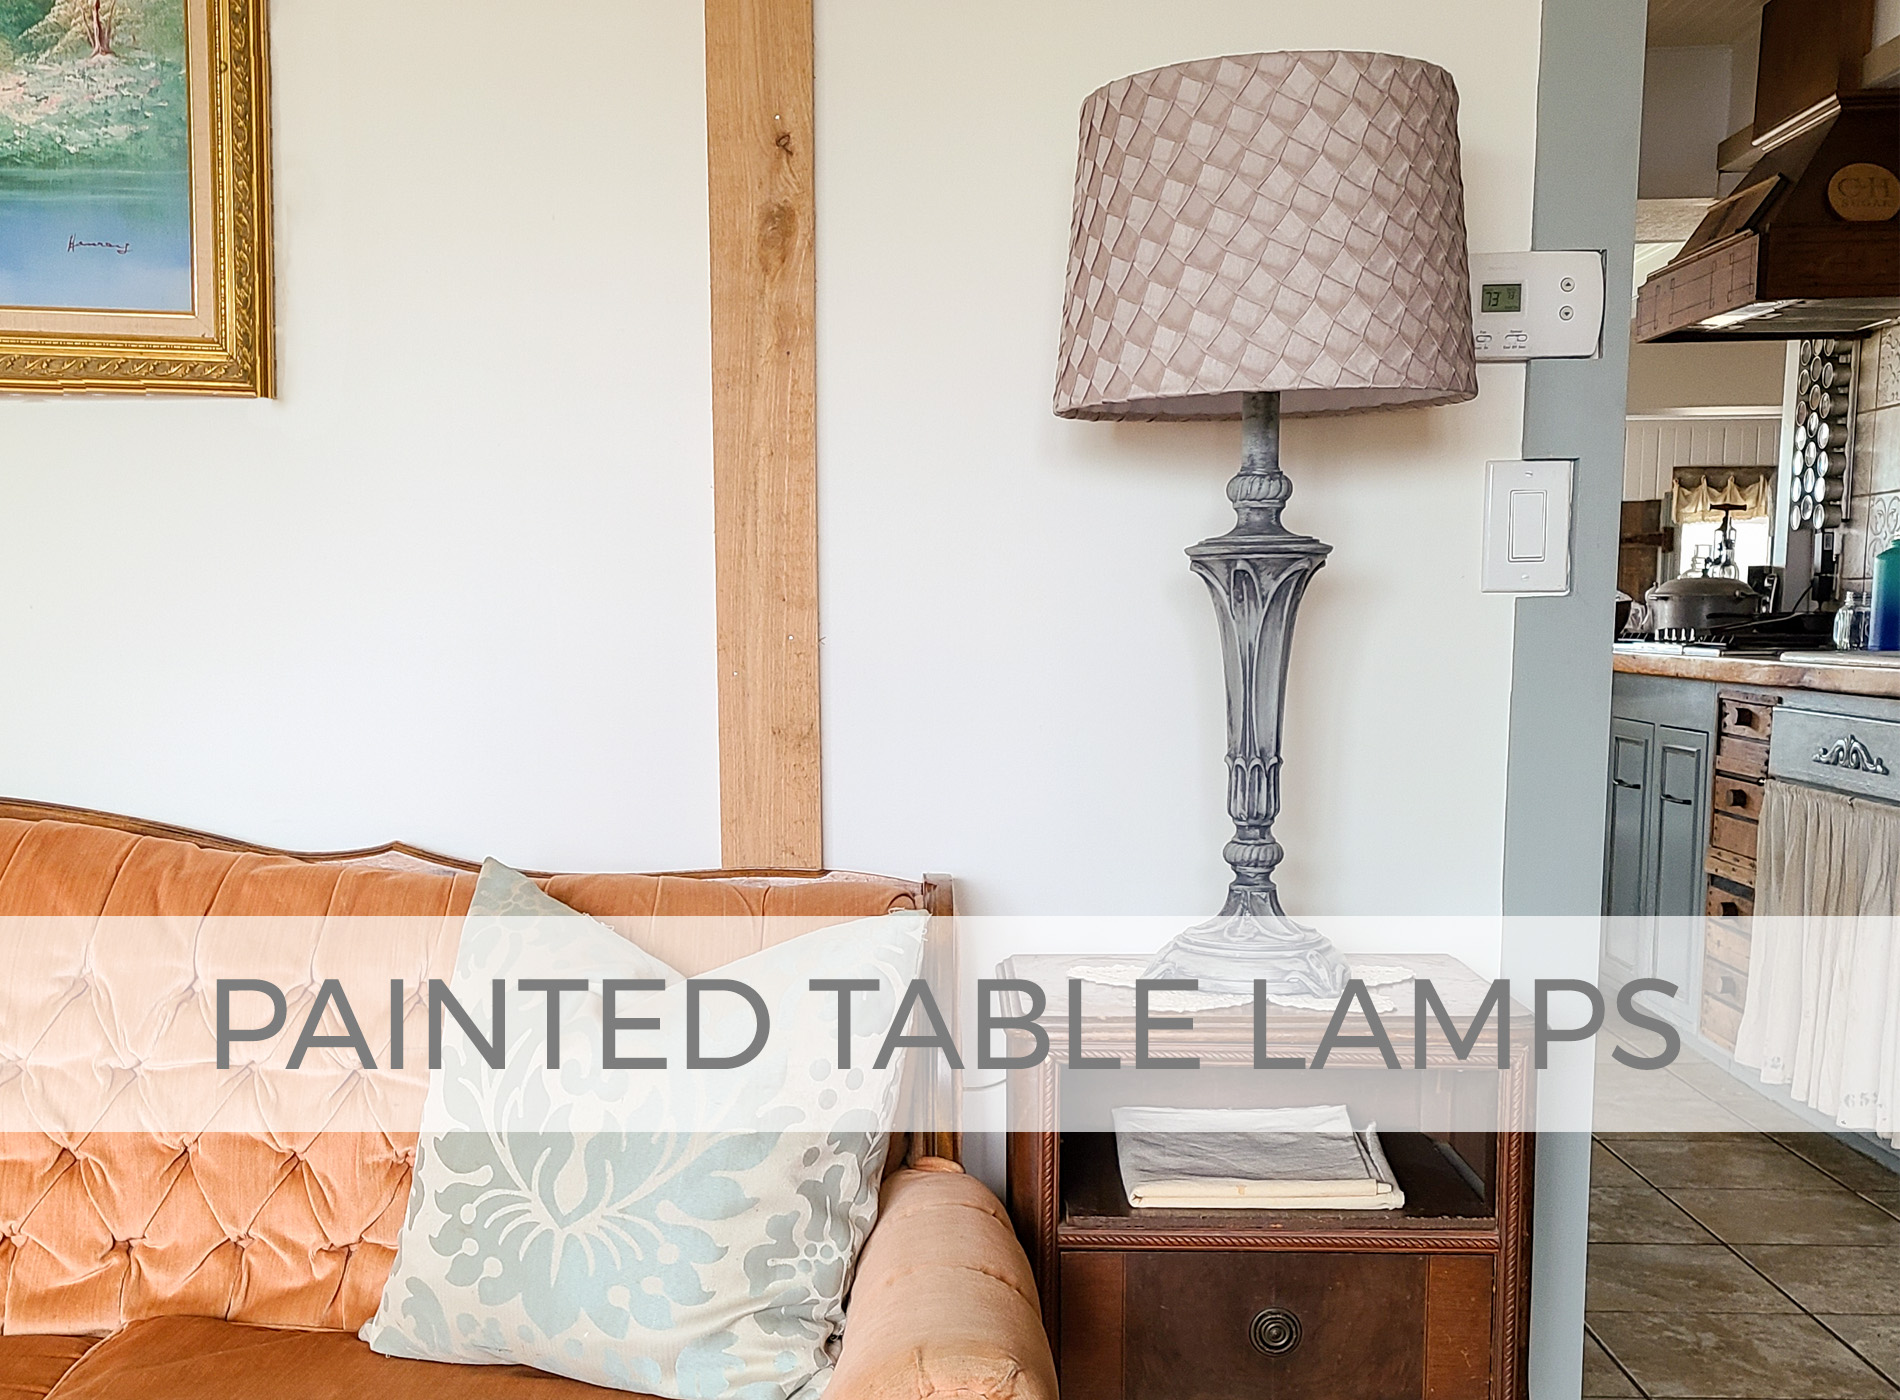 Painted Table Lamps The Easy Way by Larissa of Prodigal Pieces | prodigalpieces.com #prodigalpieces